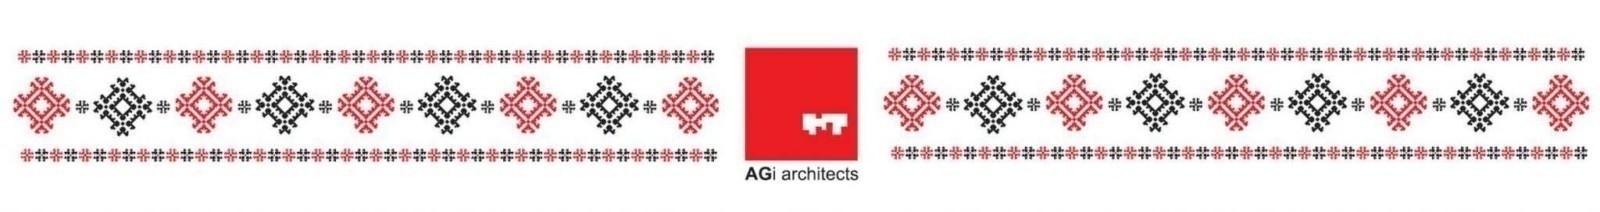 AGi Architects greeting card with traditional pattern